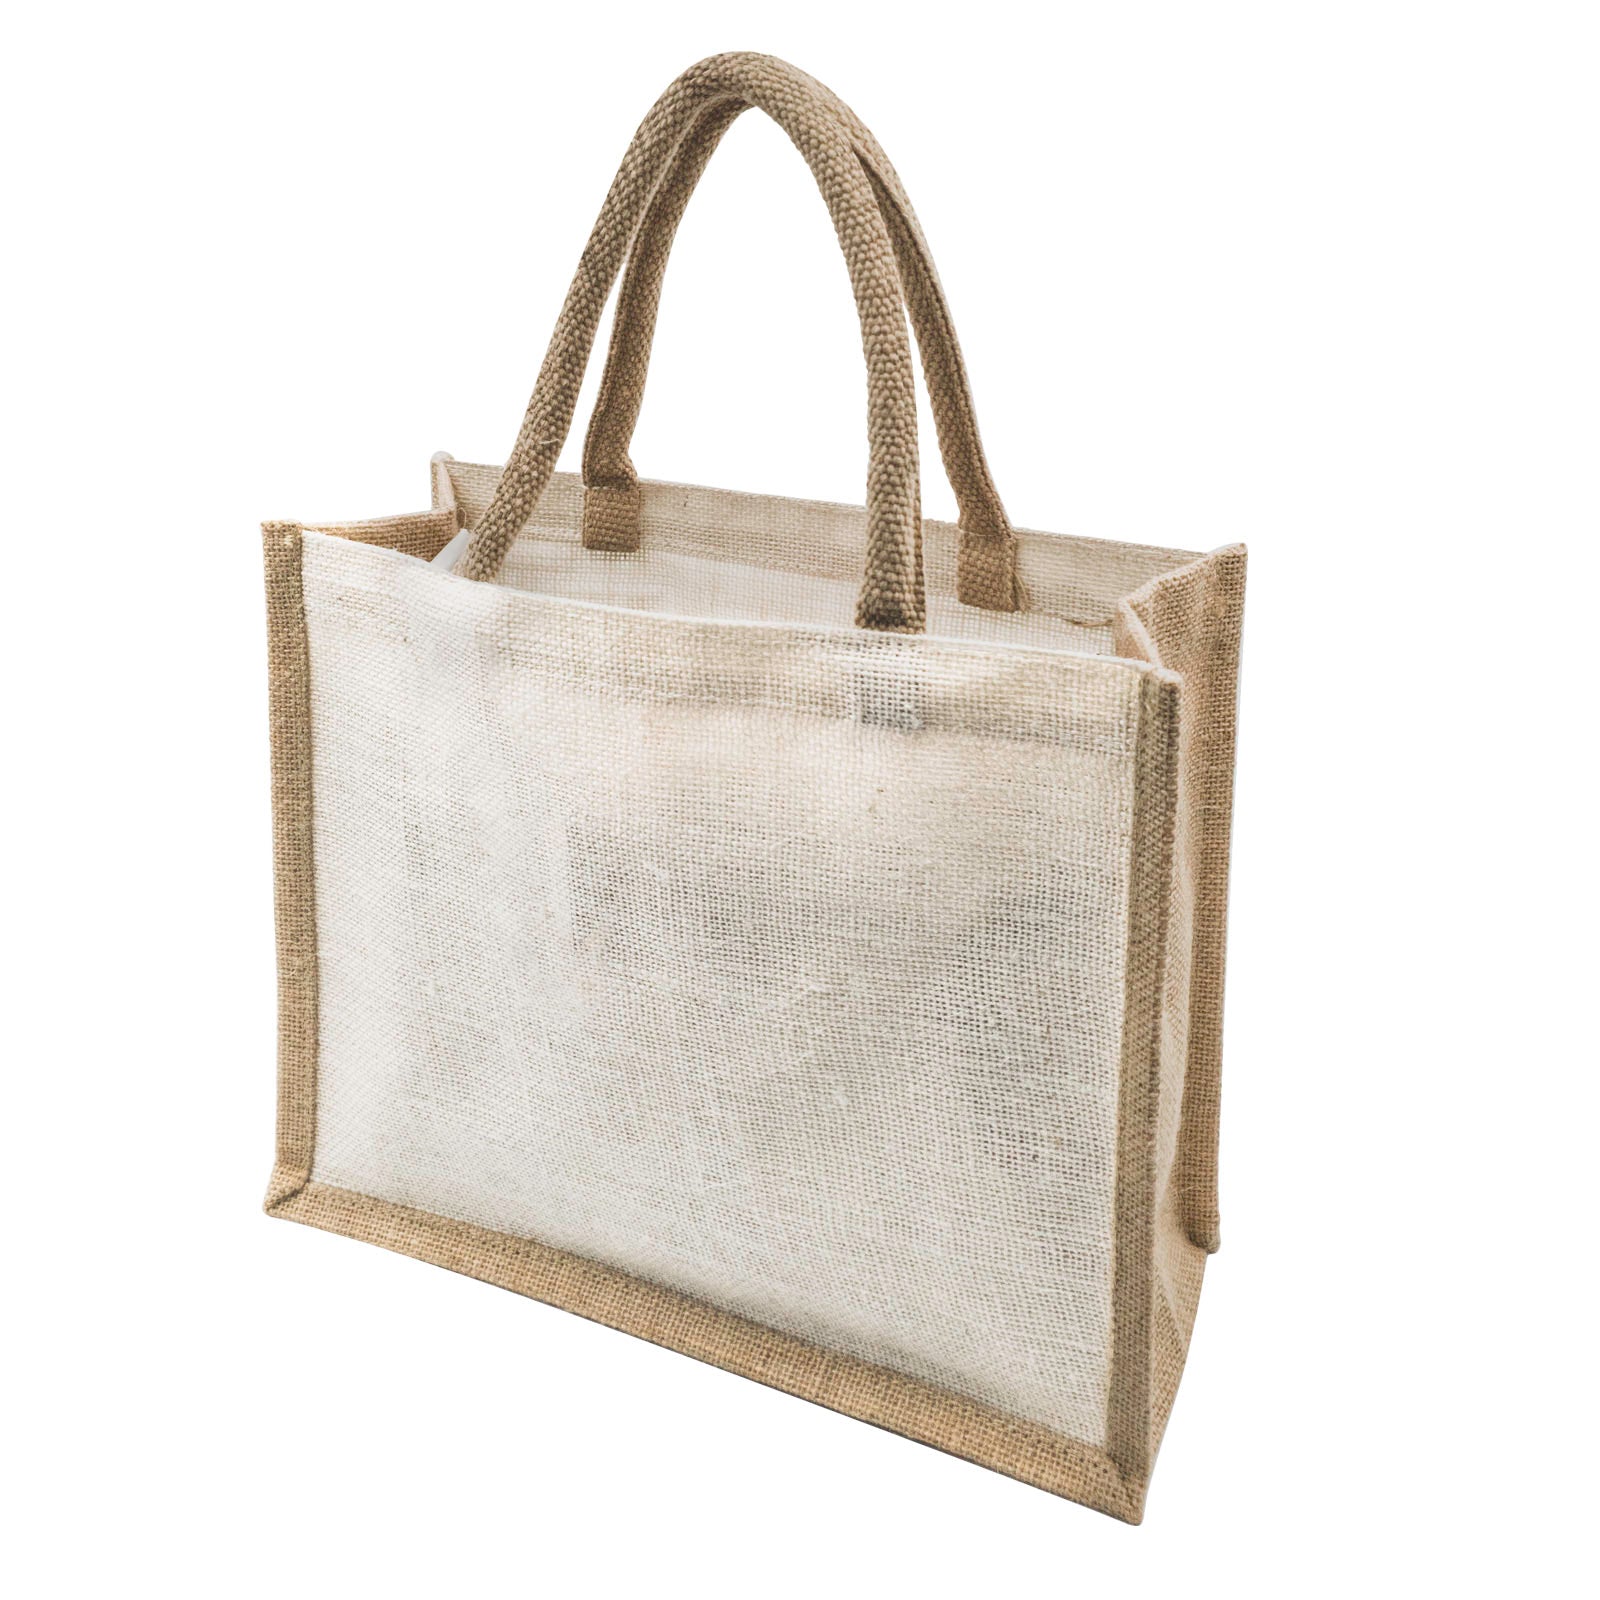 White Jute Hand Bag with Brown Border